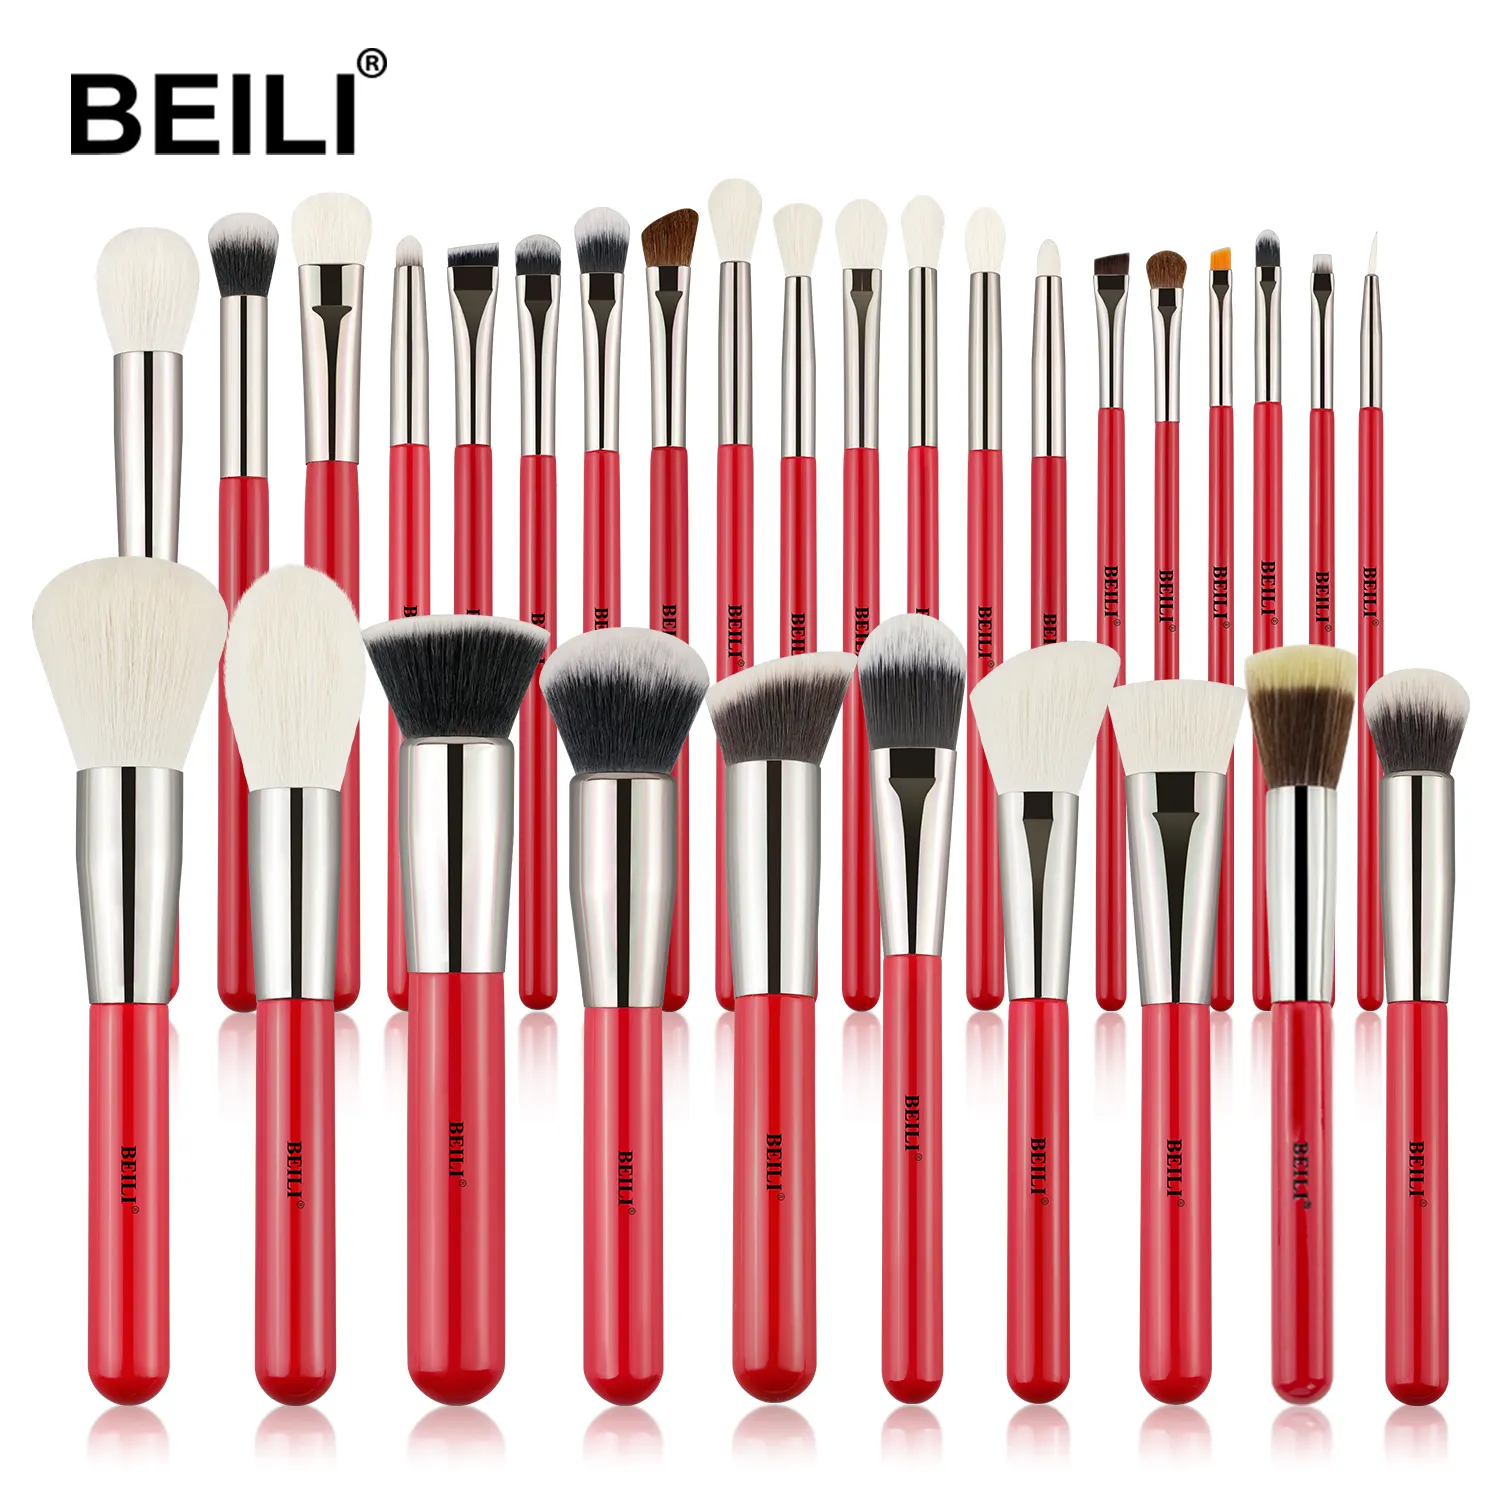 BEILI Makeup Brush Kit 30pcs Red Wooden Handle Natural Goat Pony Synthetic Hair Eyeshadow Brush Foundation Make Up Accessories